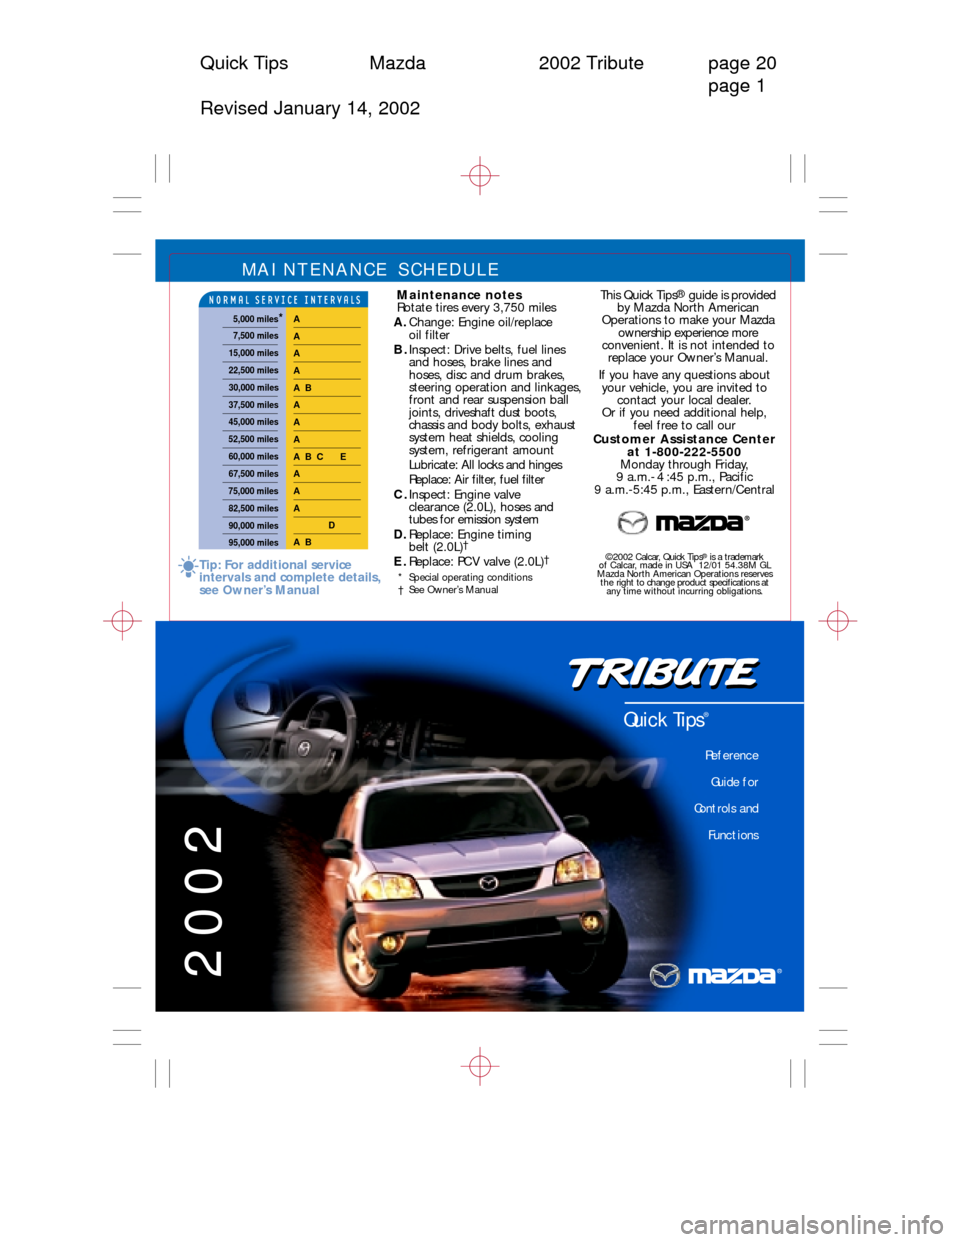 MAZDA MODEL TRIBUTE 2002  Quick Tips (in English) Quick Tips Mazda 2002 Tribute page 20
page 1
Revised January 14, 2002
MAINTENANCE SCHEDULE 
Maintenance notes
Rotate tires every 3,750 miles
A.Change: Engine oil/replace 
oil filter
B.Inspect: Drive b